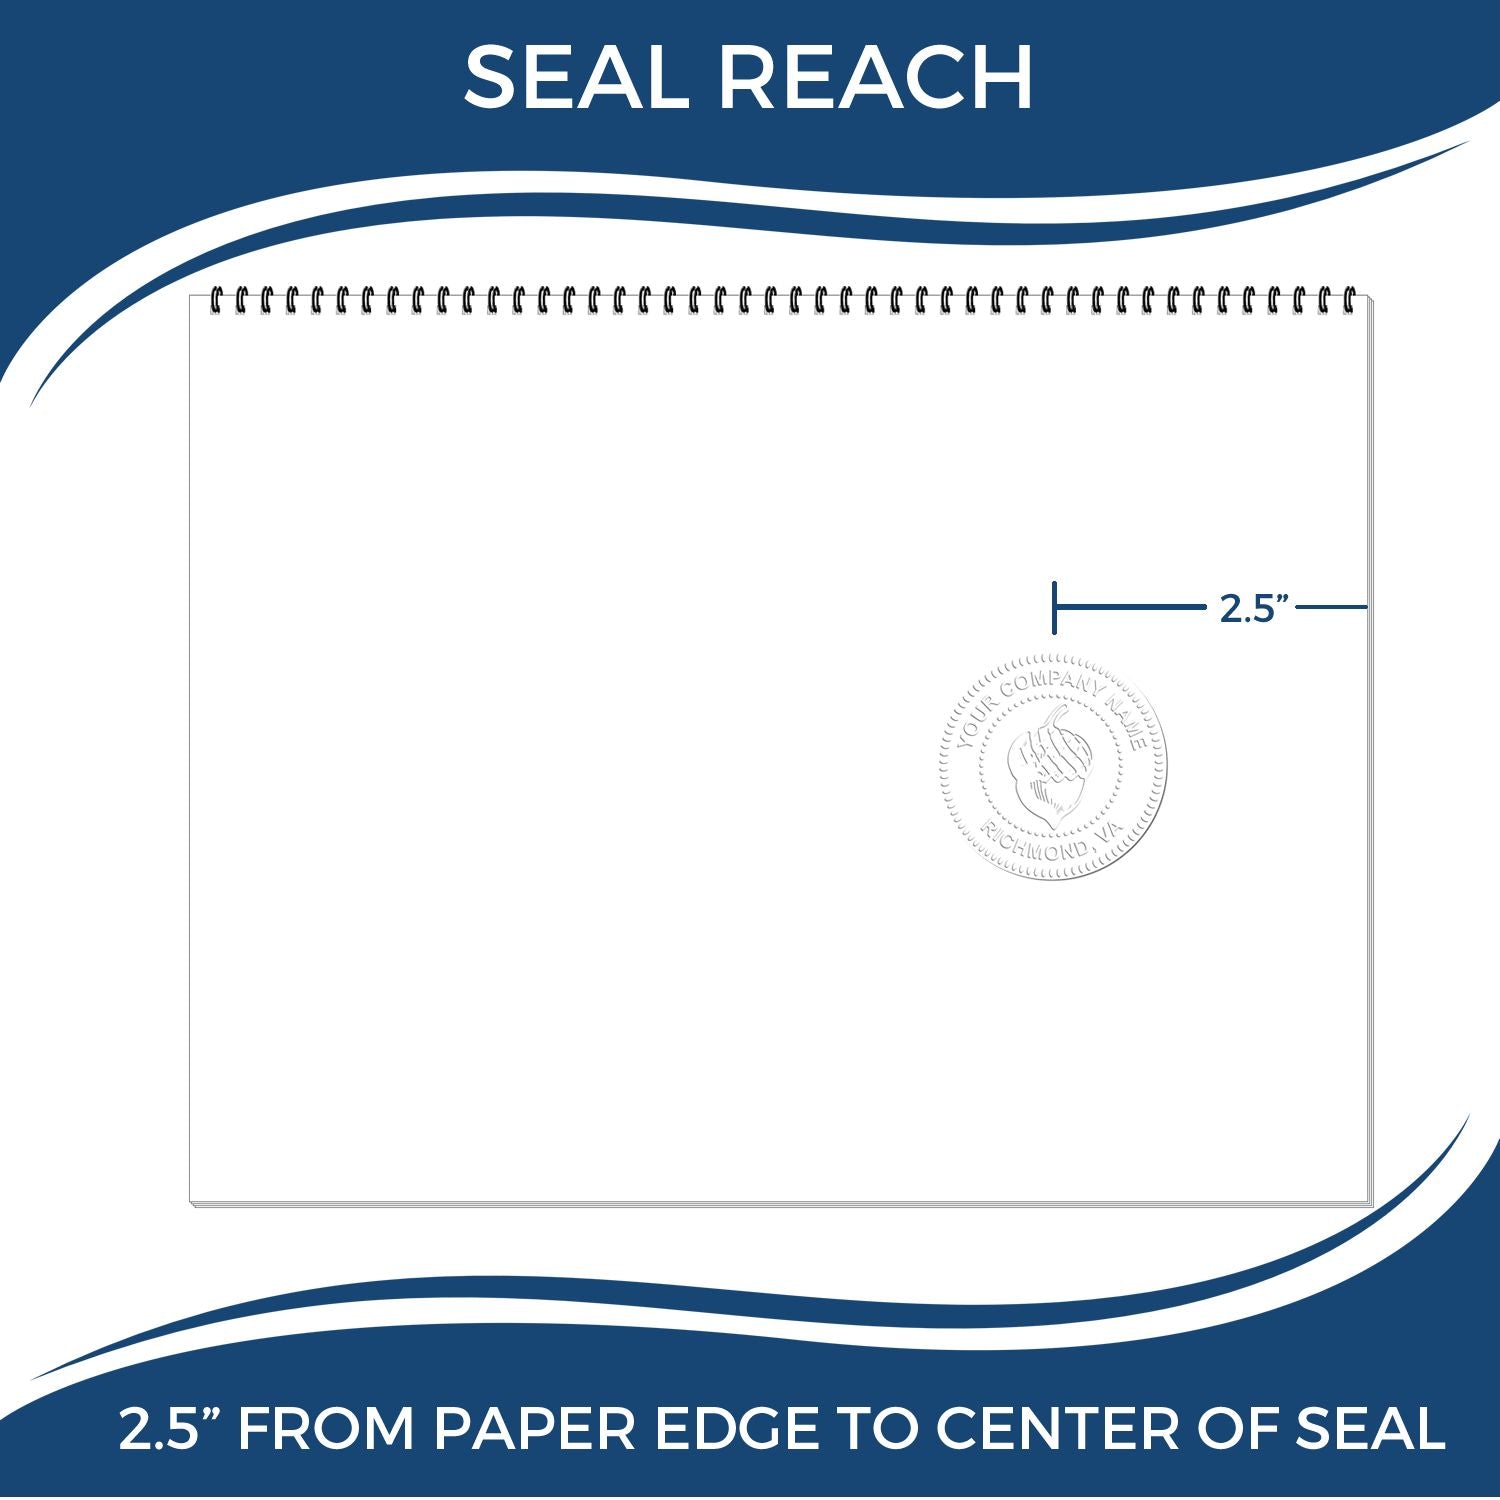 An infographic showing the seal reach which is represented by a ruler and a miniature seal image of the Heavy Duty Kentucky Landscape Architect Cast Iron Embosser